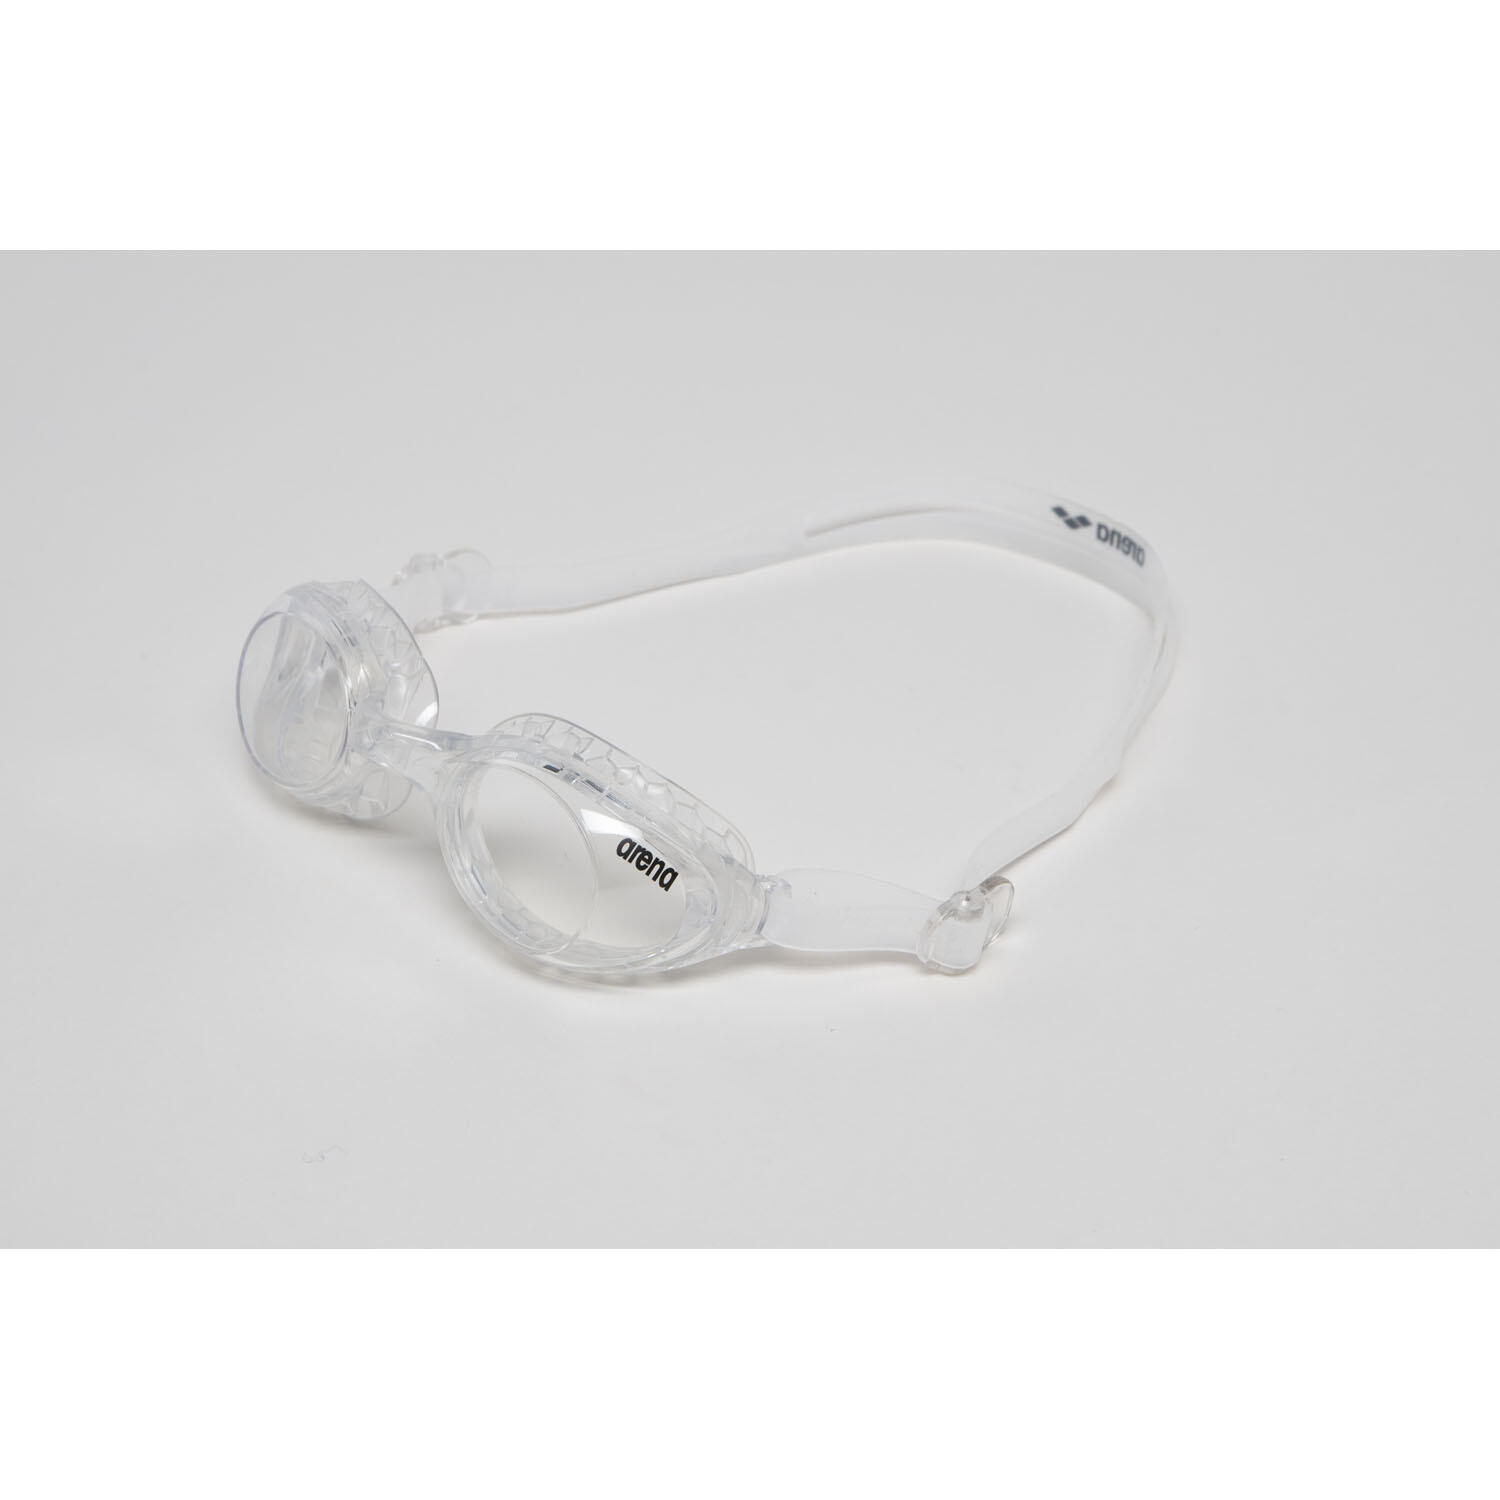 ARENA Arena Airsoft Goggles - Clear